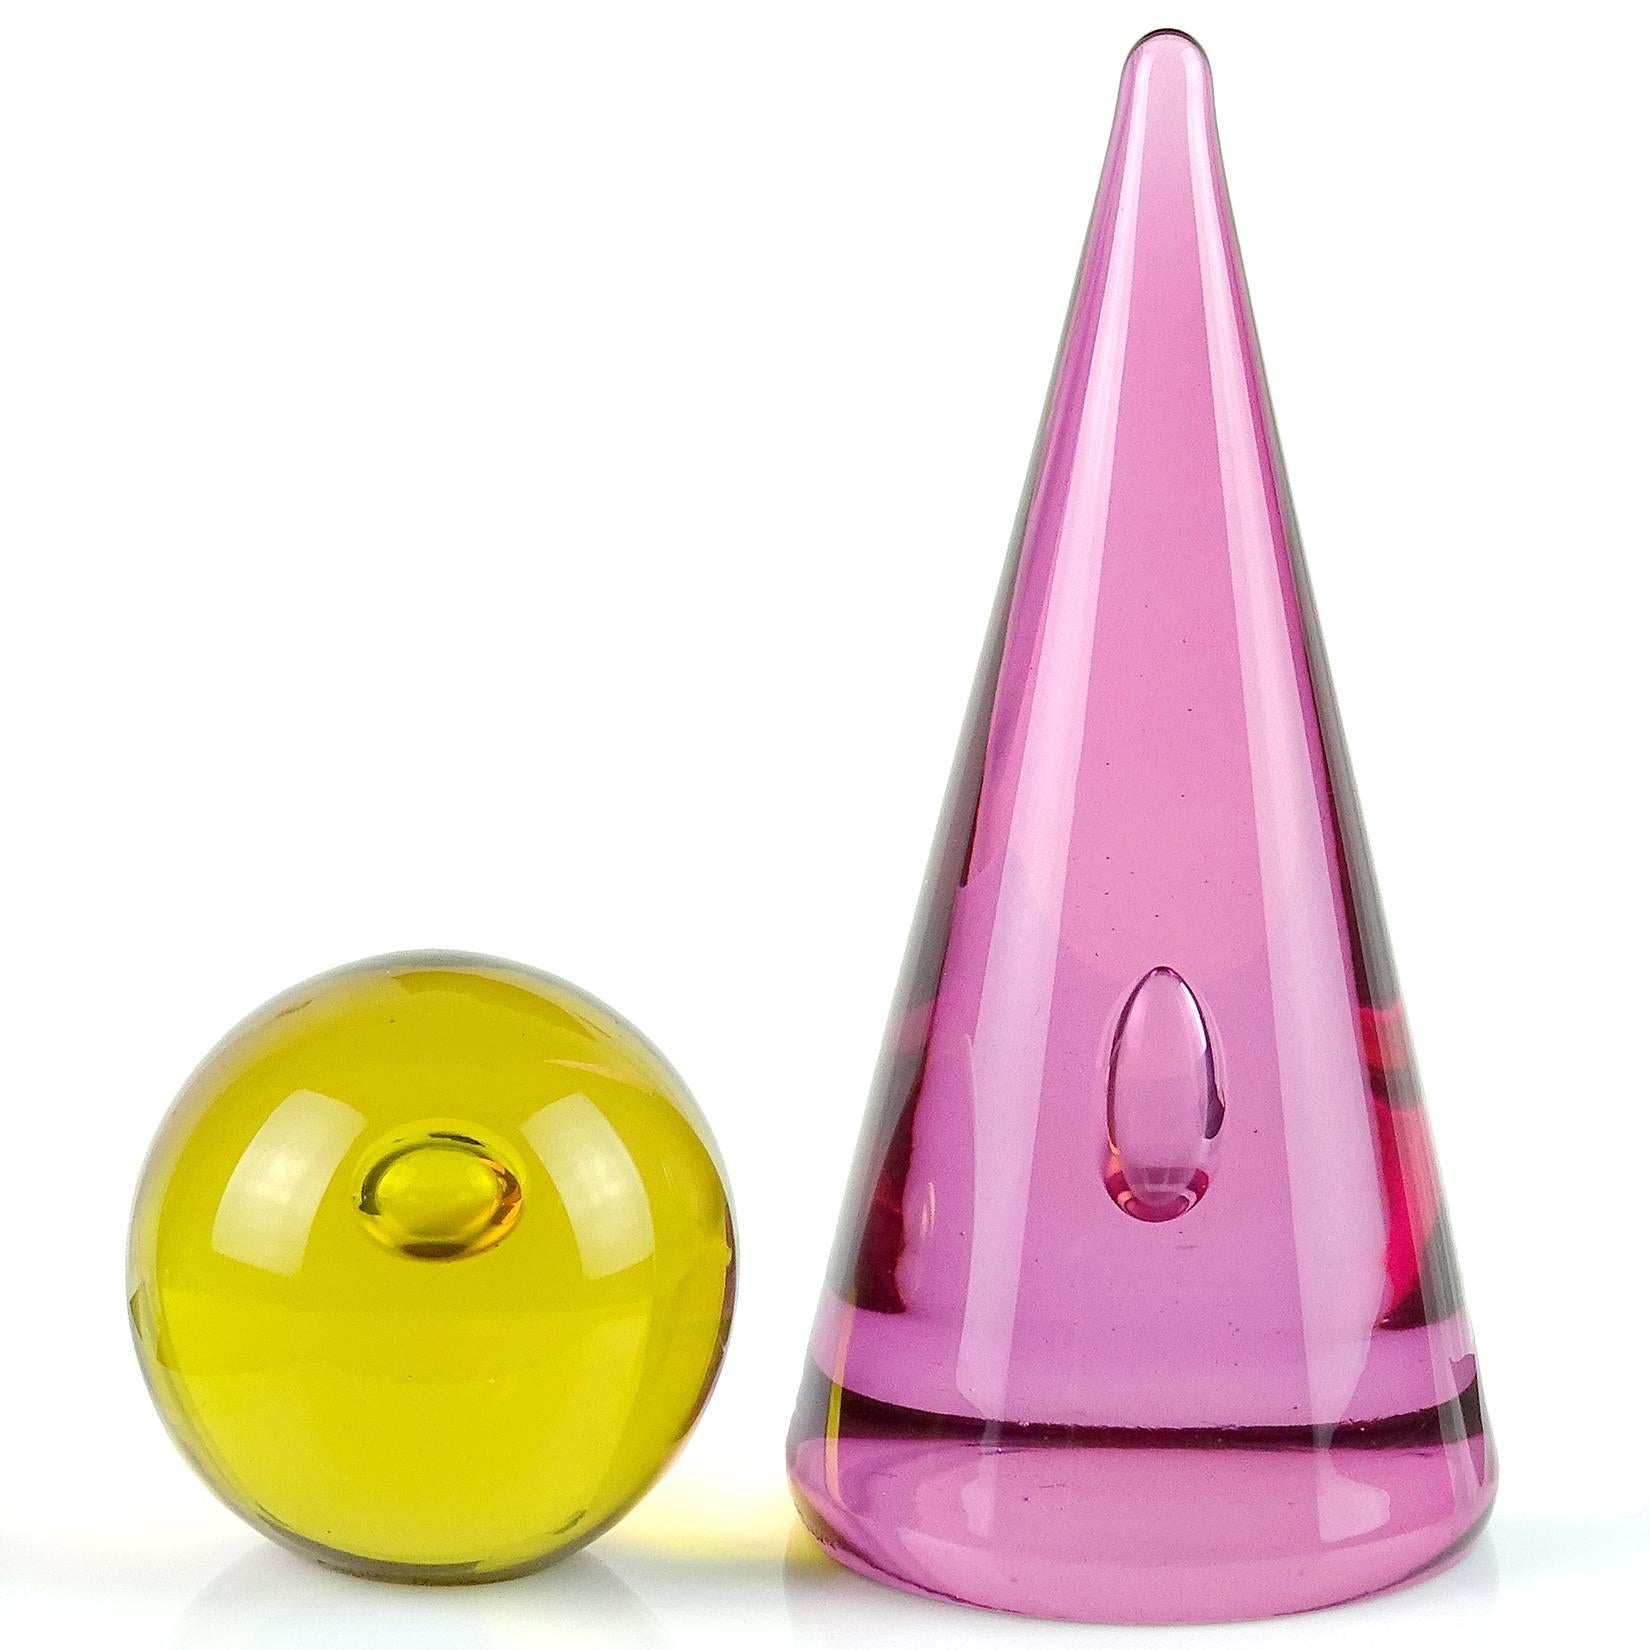 Beautiful Murano handblown Sommerso amethyst / pink obelisk and yellow paperweight Italian art glass sculpture set. Signed “Oggetti Murano” and attributed to designer Alfredo Barbini. Minimalist / Spage Age style, with bubbles inside. Obelisk